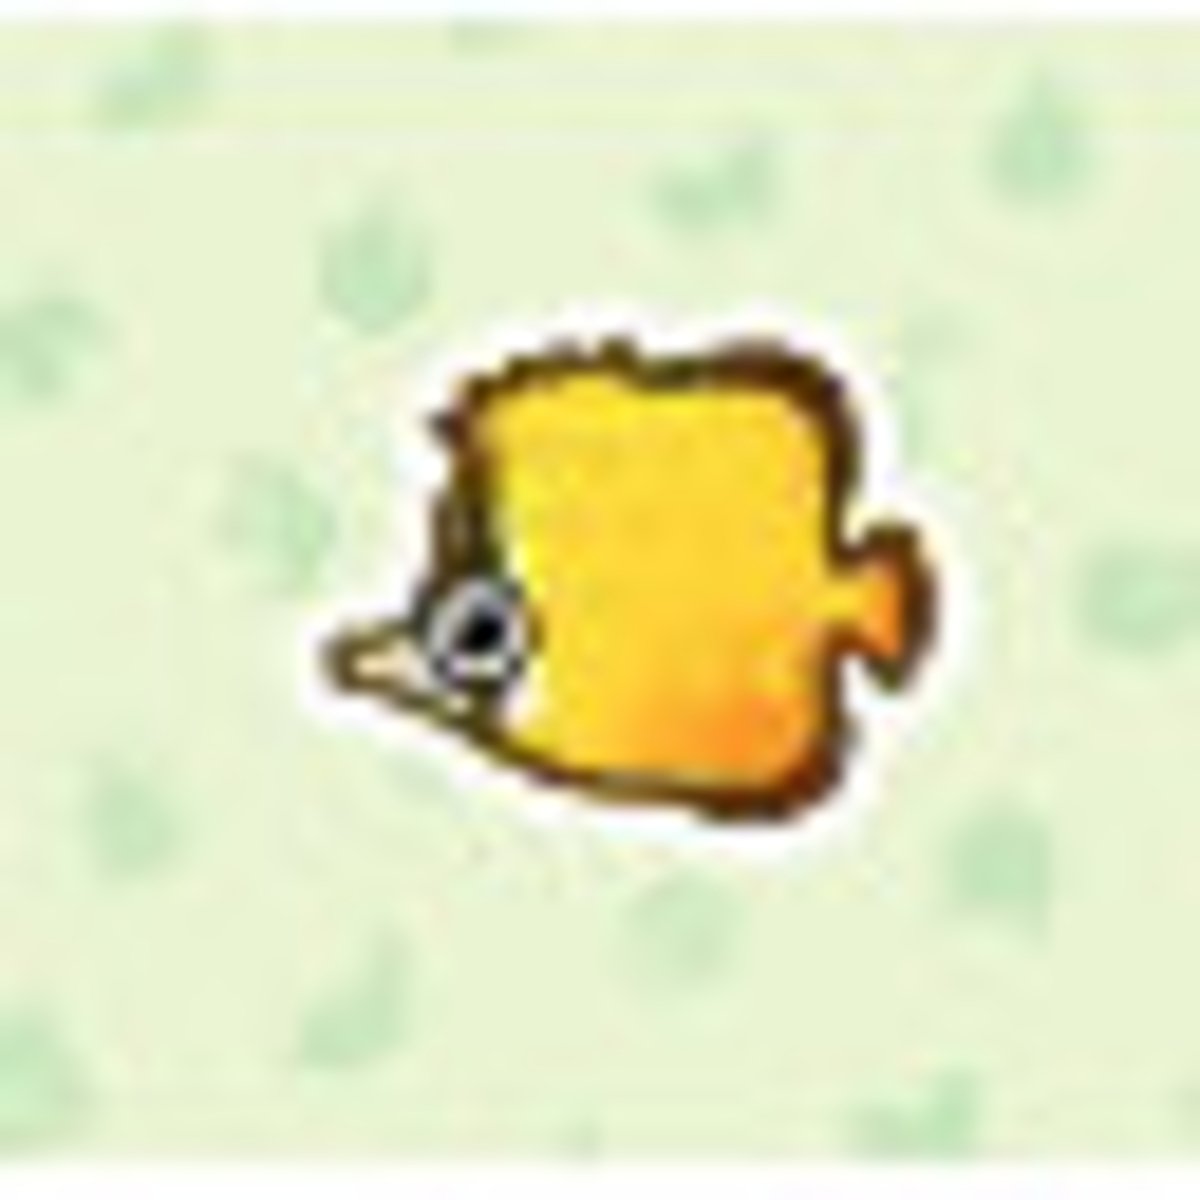 Butterfly Fish - Animal Crossing: New Horizons